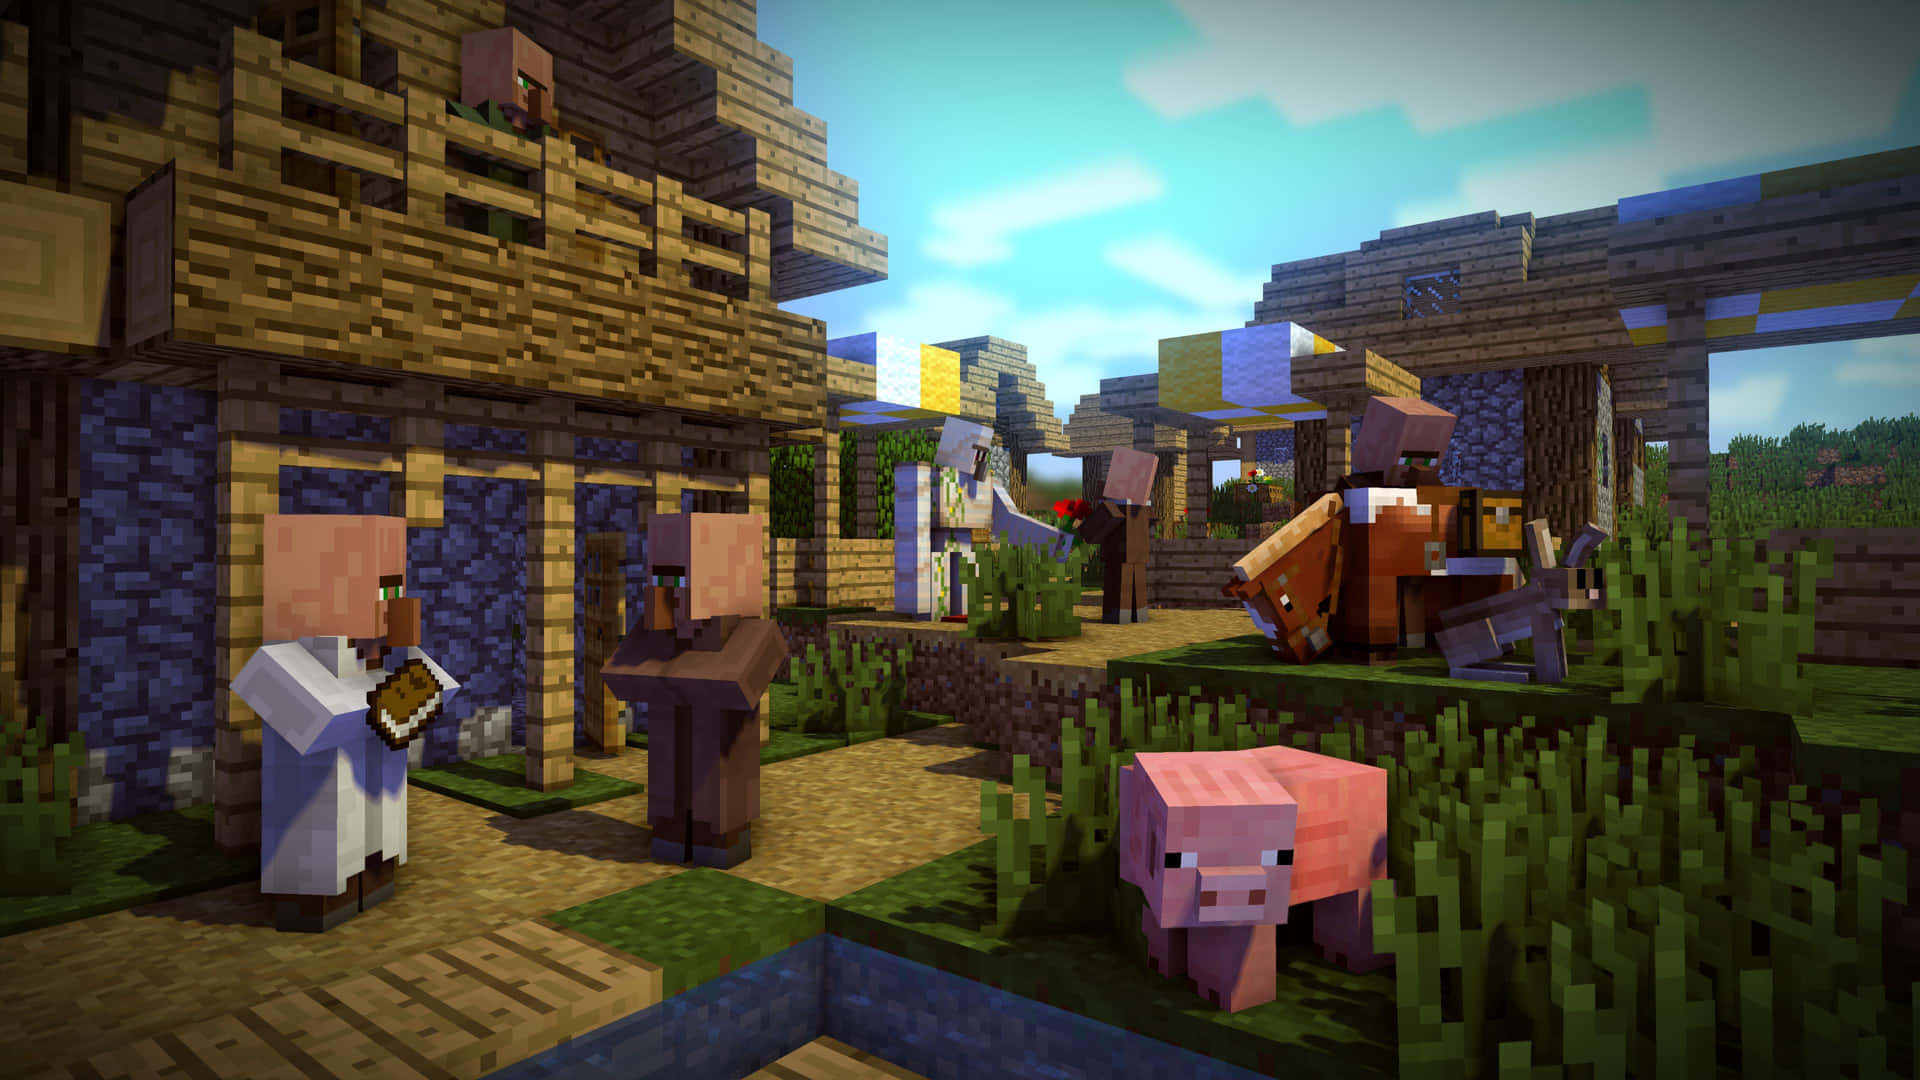 A Minecraft Villager standing confidently in the world of Minecraft Wallpaper